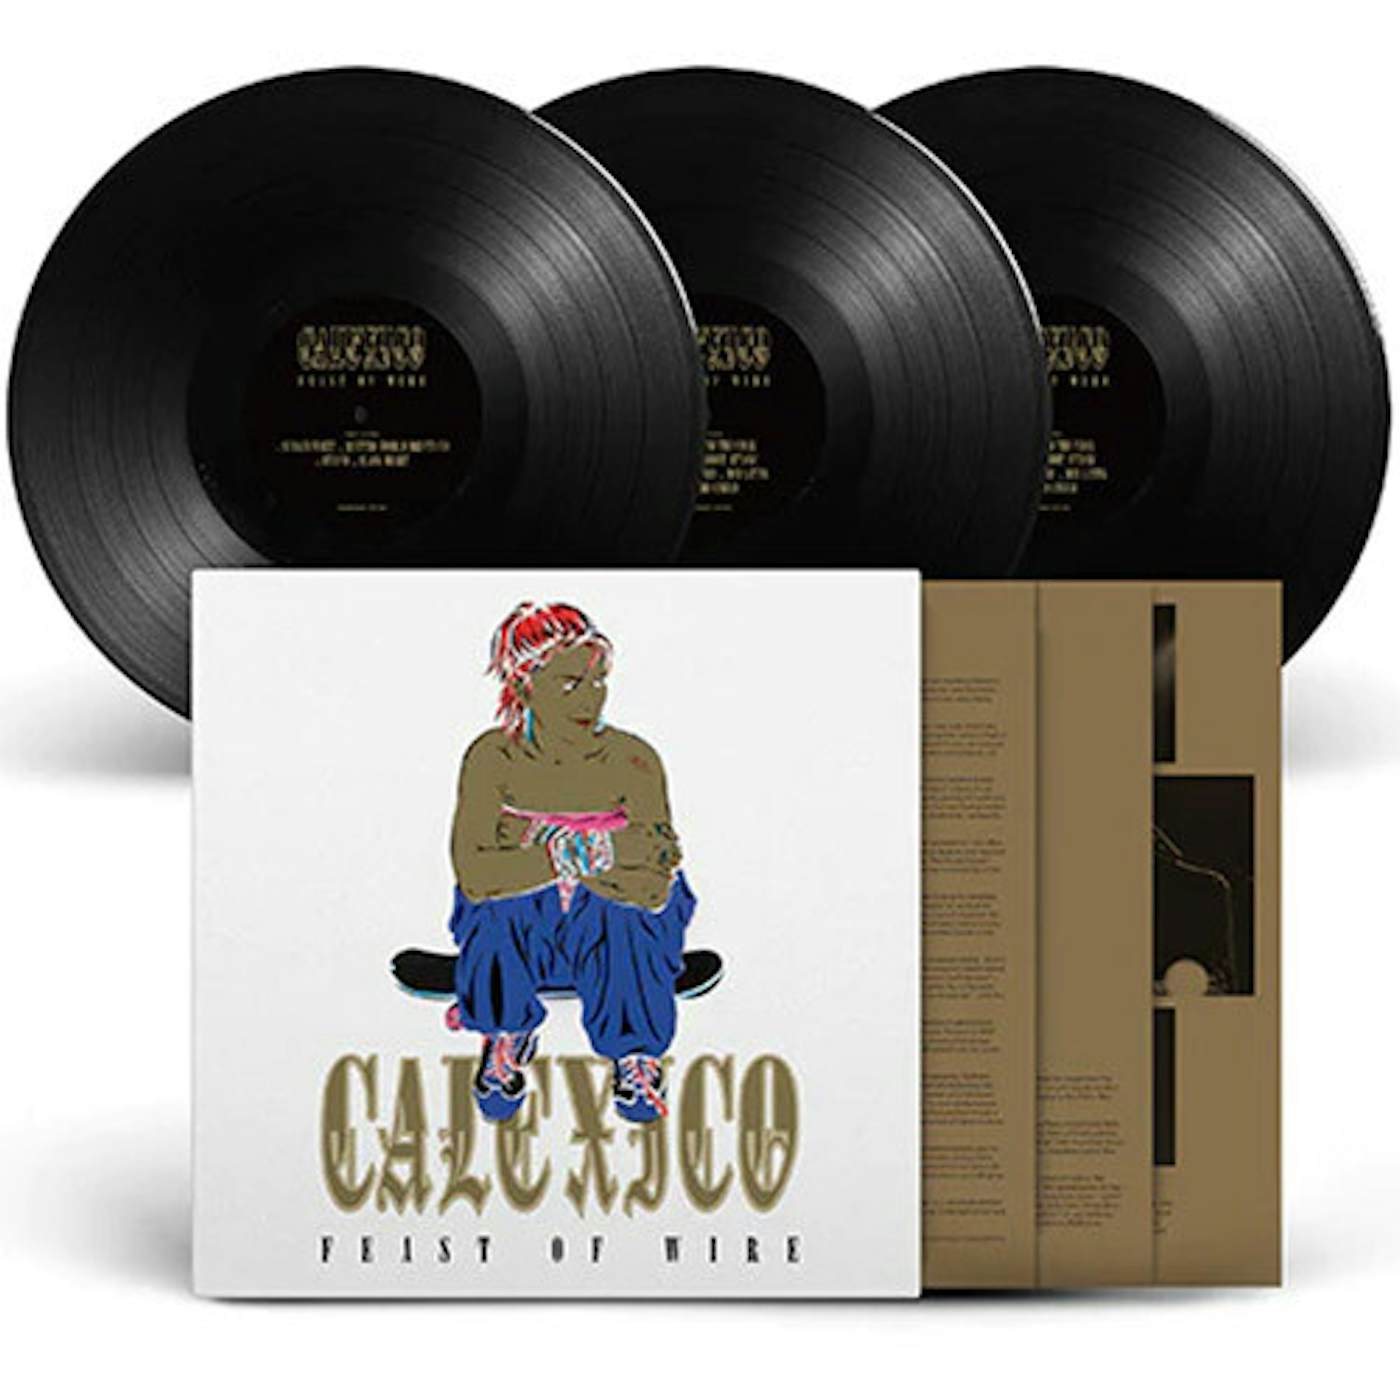 Calexico Feast Of Wire - 20th Anniversary Deluxe Edition Vinyl Record